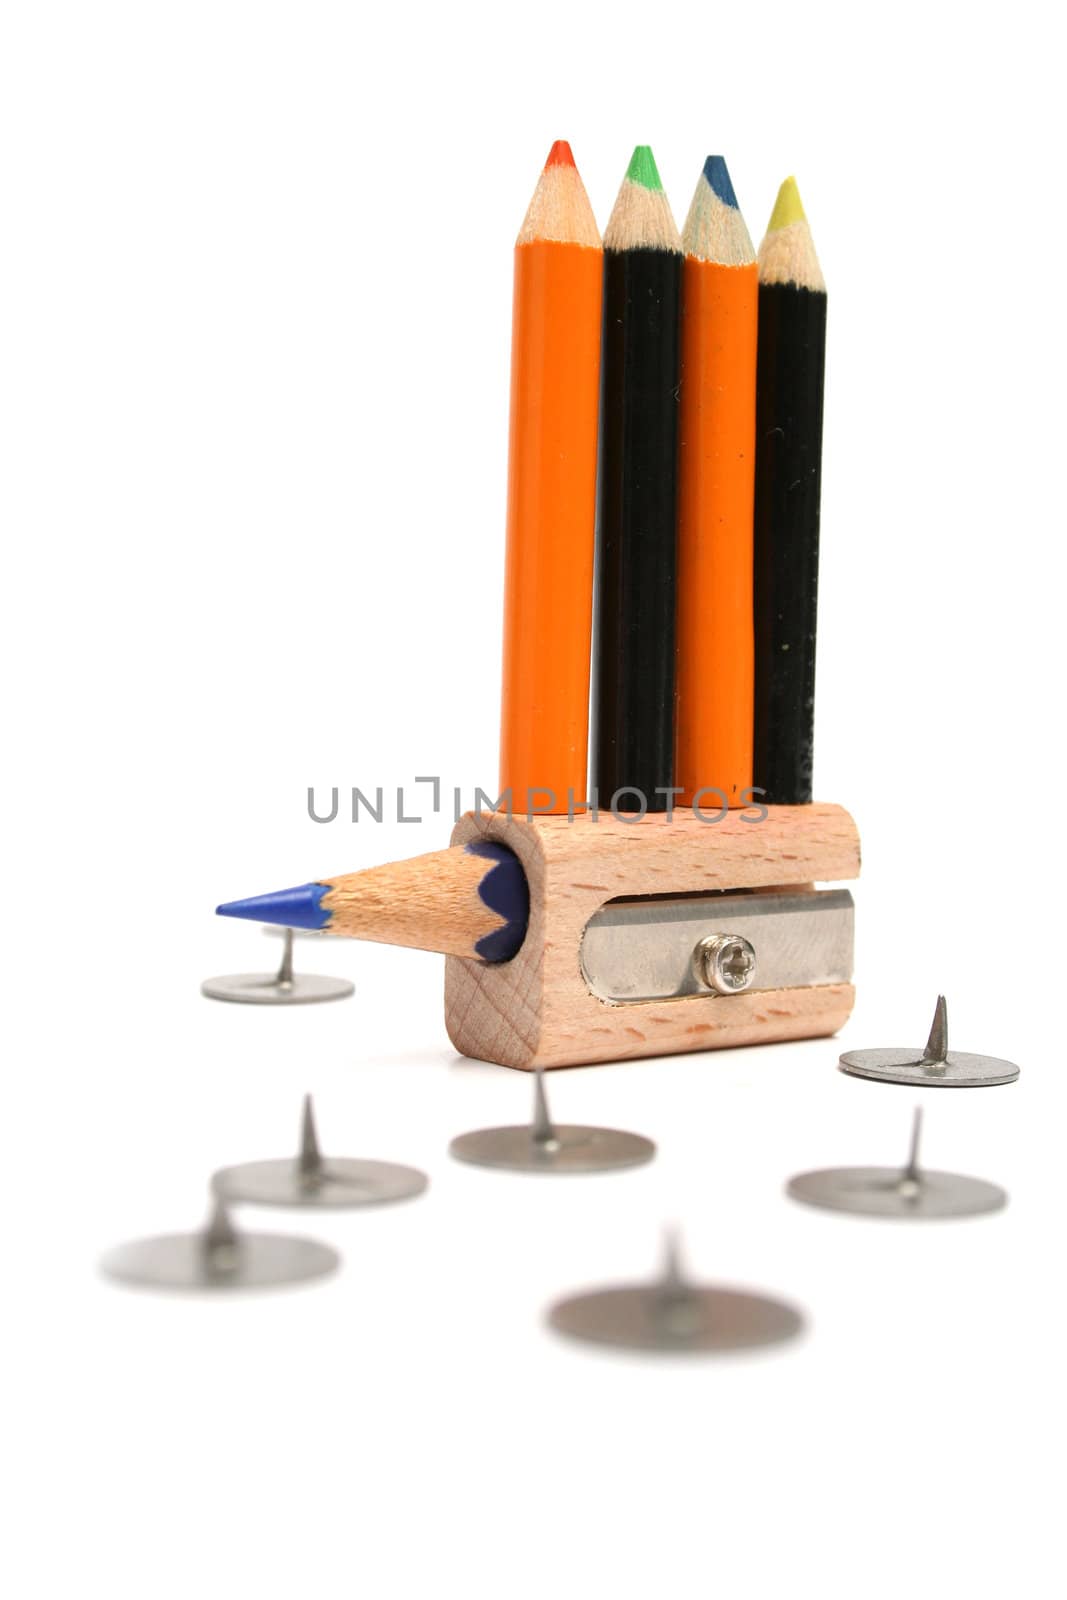  Small color pencils are rescueed on unusual sharpeners by parrus